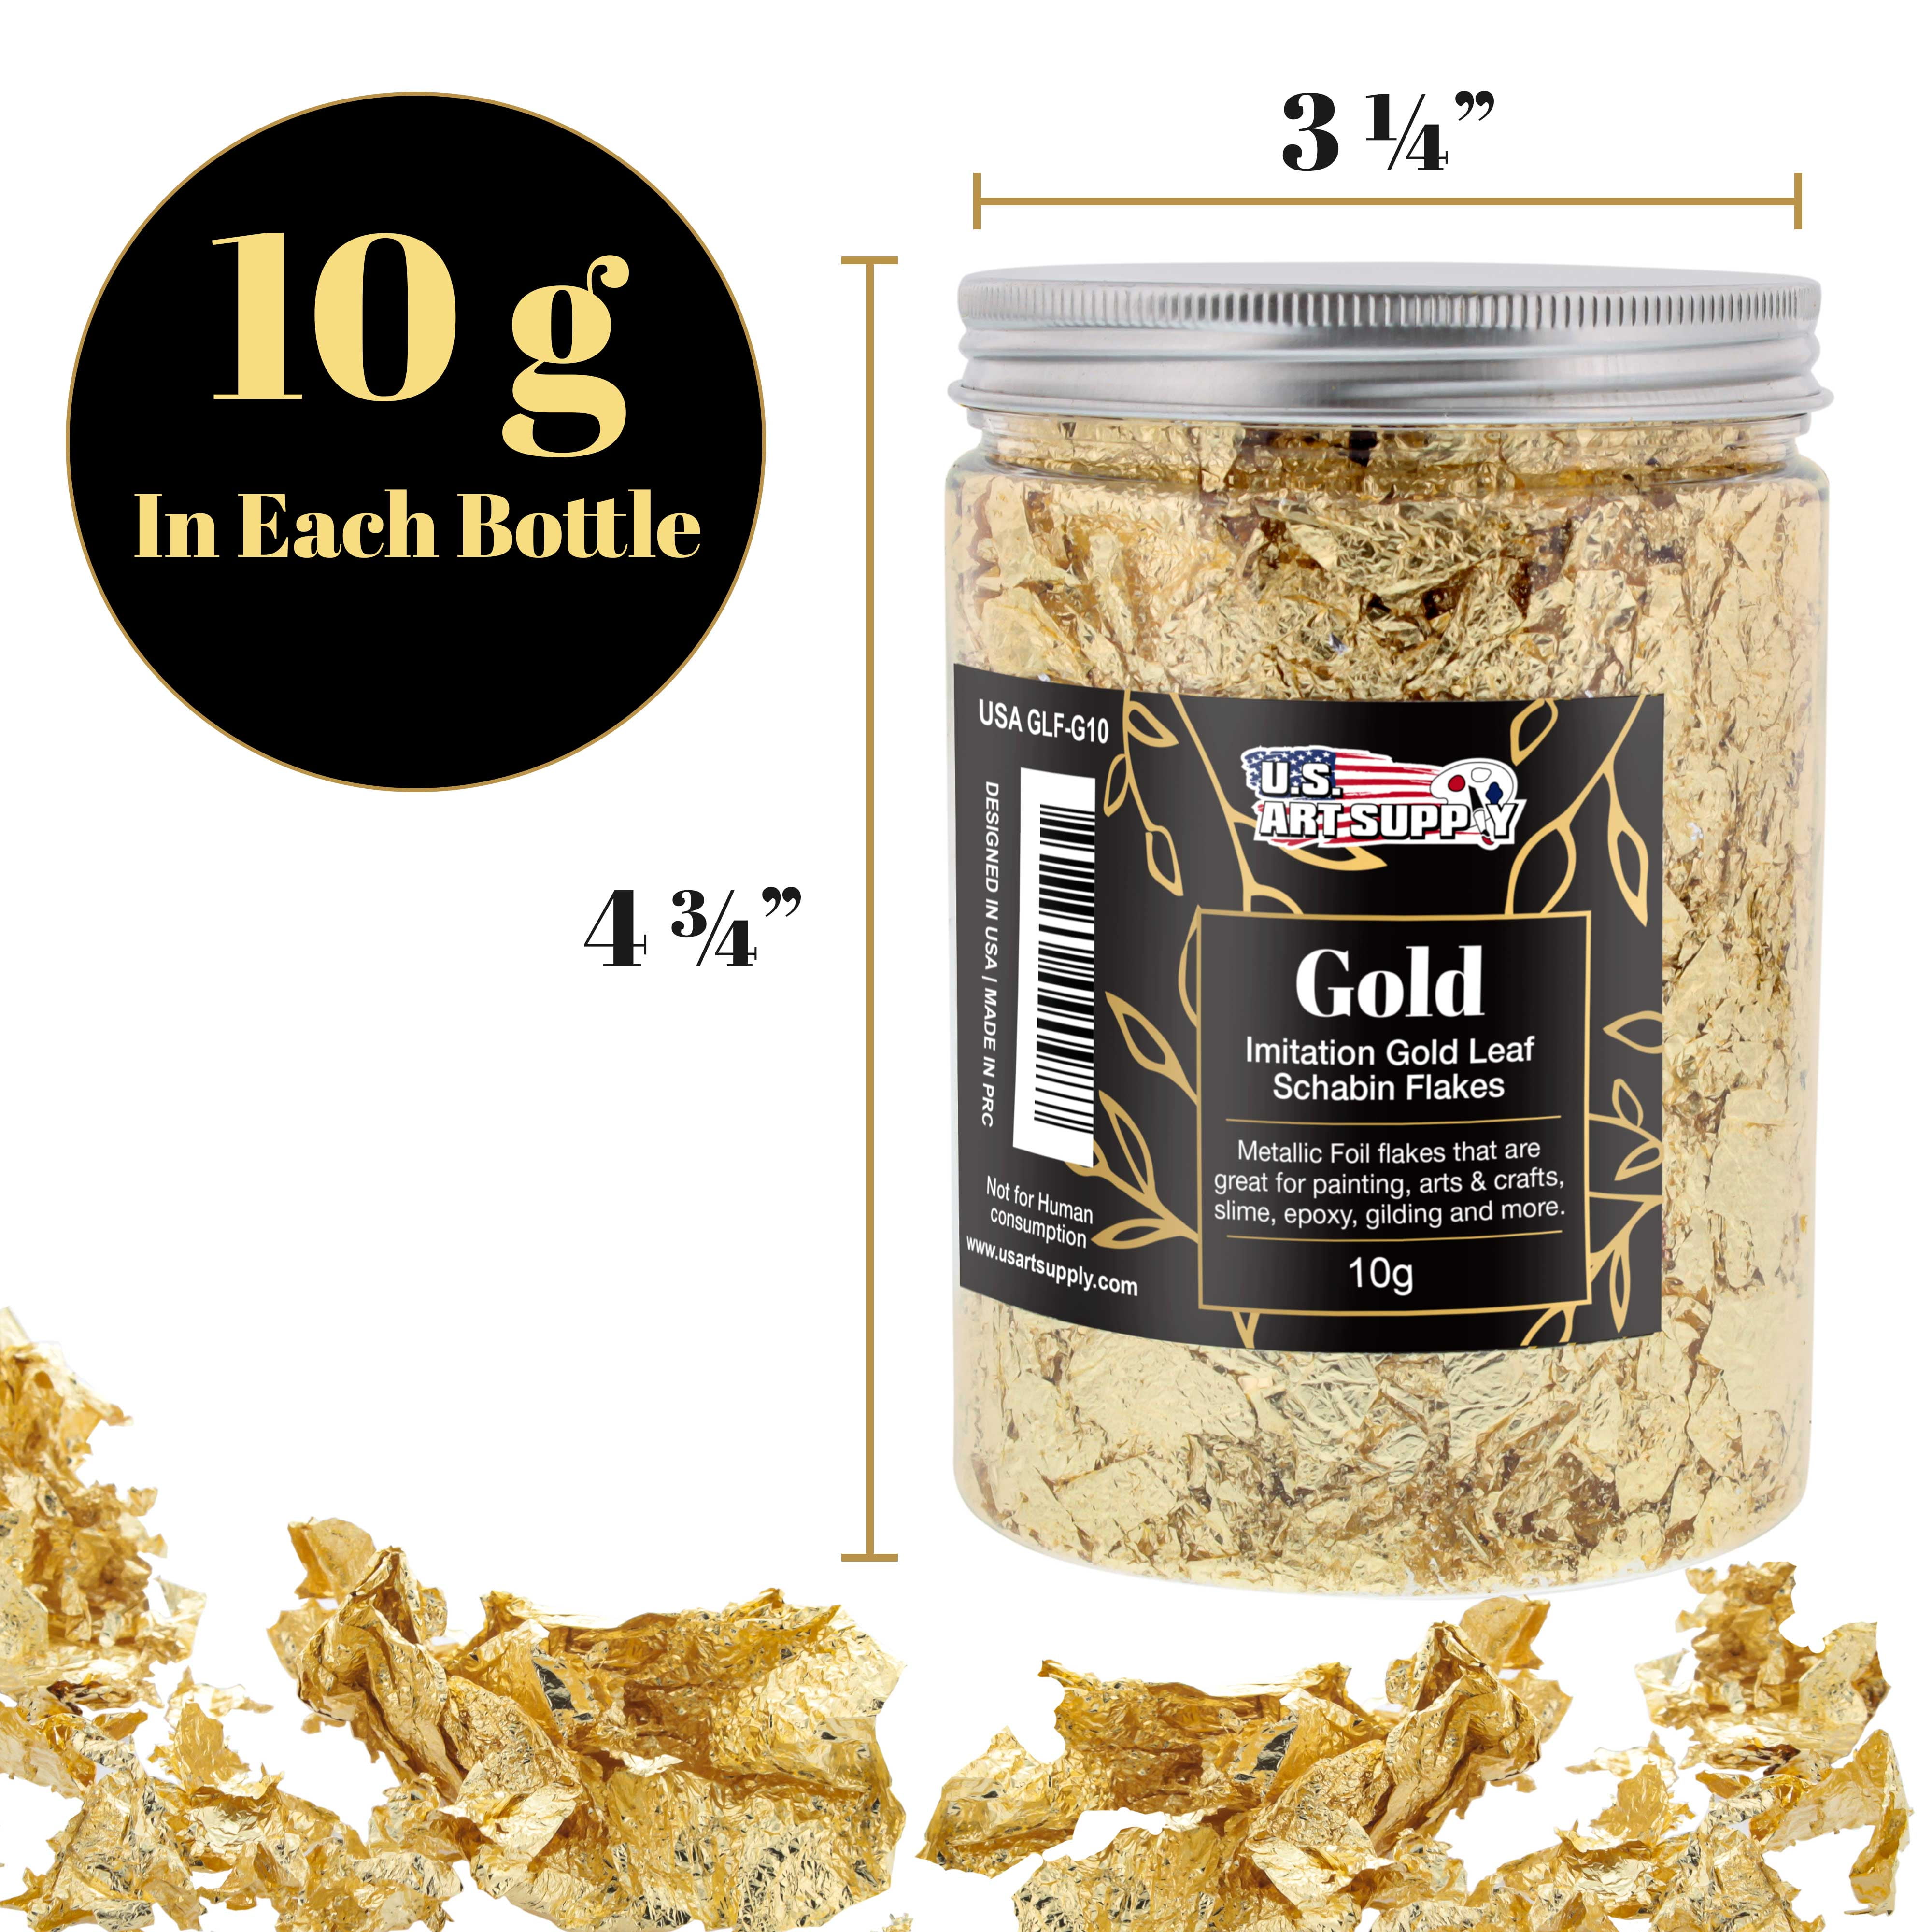 Barnabas Blattgold: Imitation Gold Leaf Schabin Flakes - Quality Metallic  Foil Flakes for Gilding, Painting Arts and Crafts (7g)